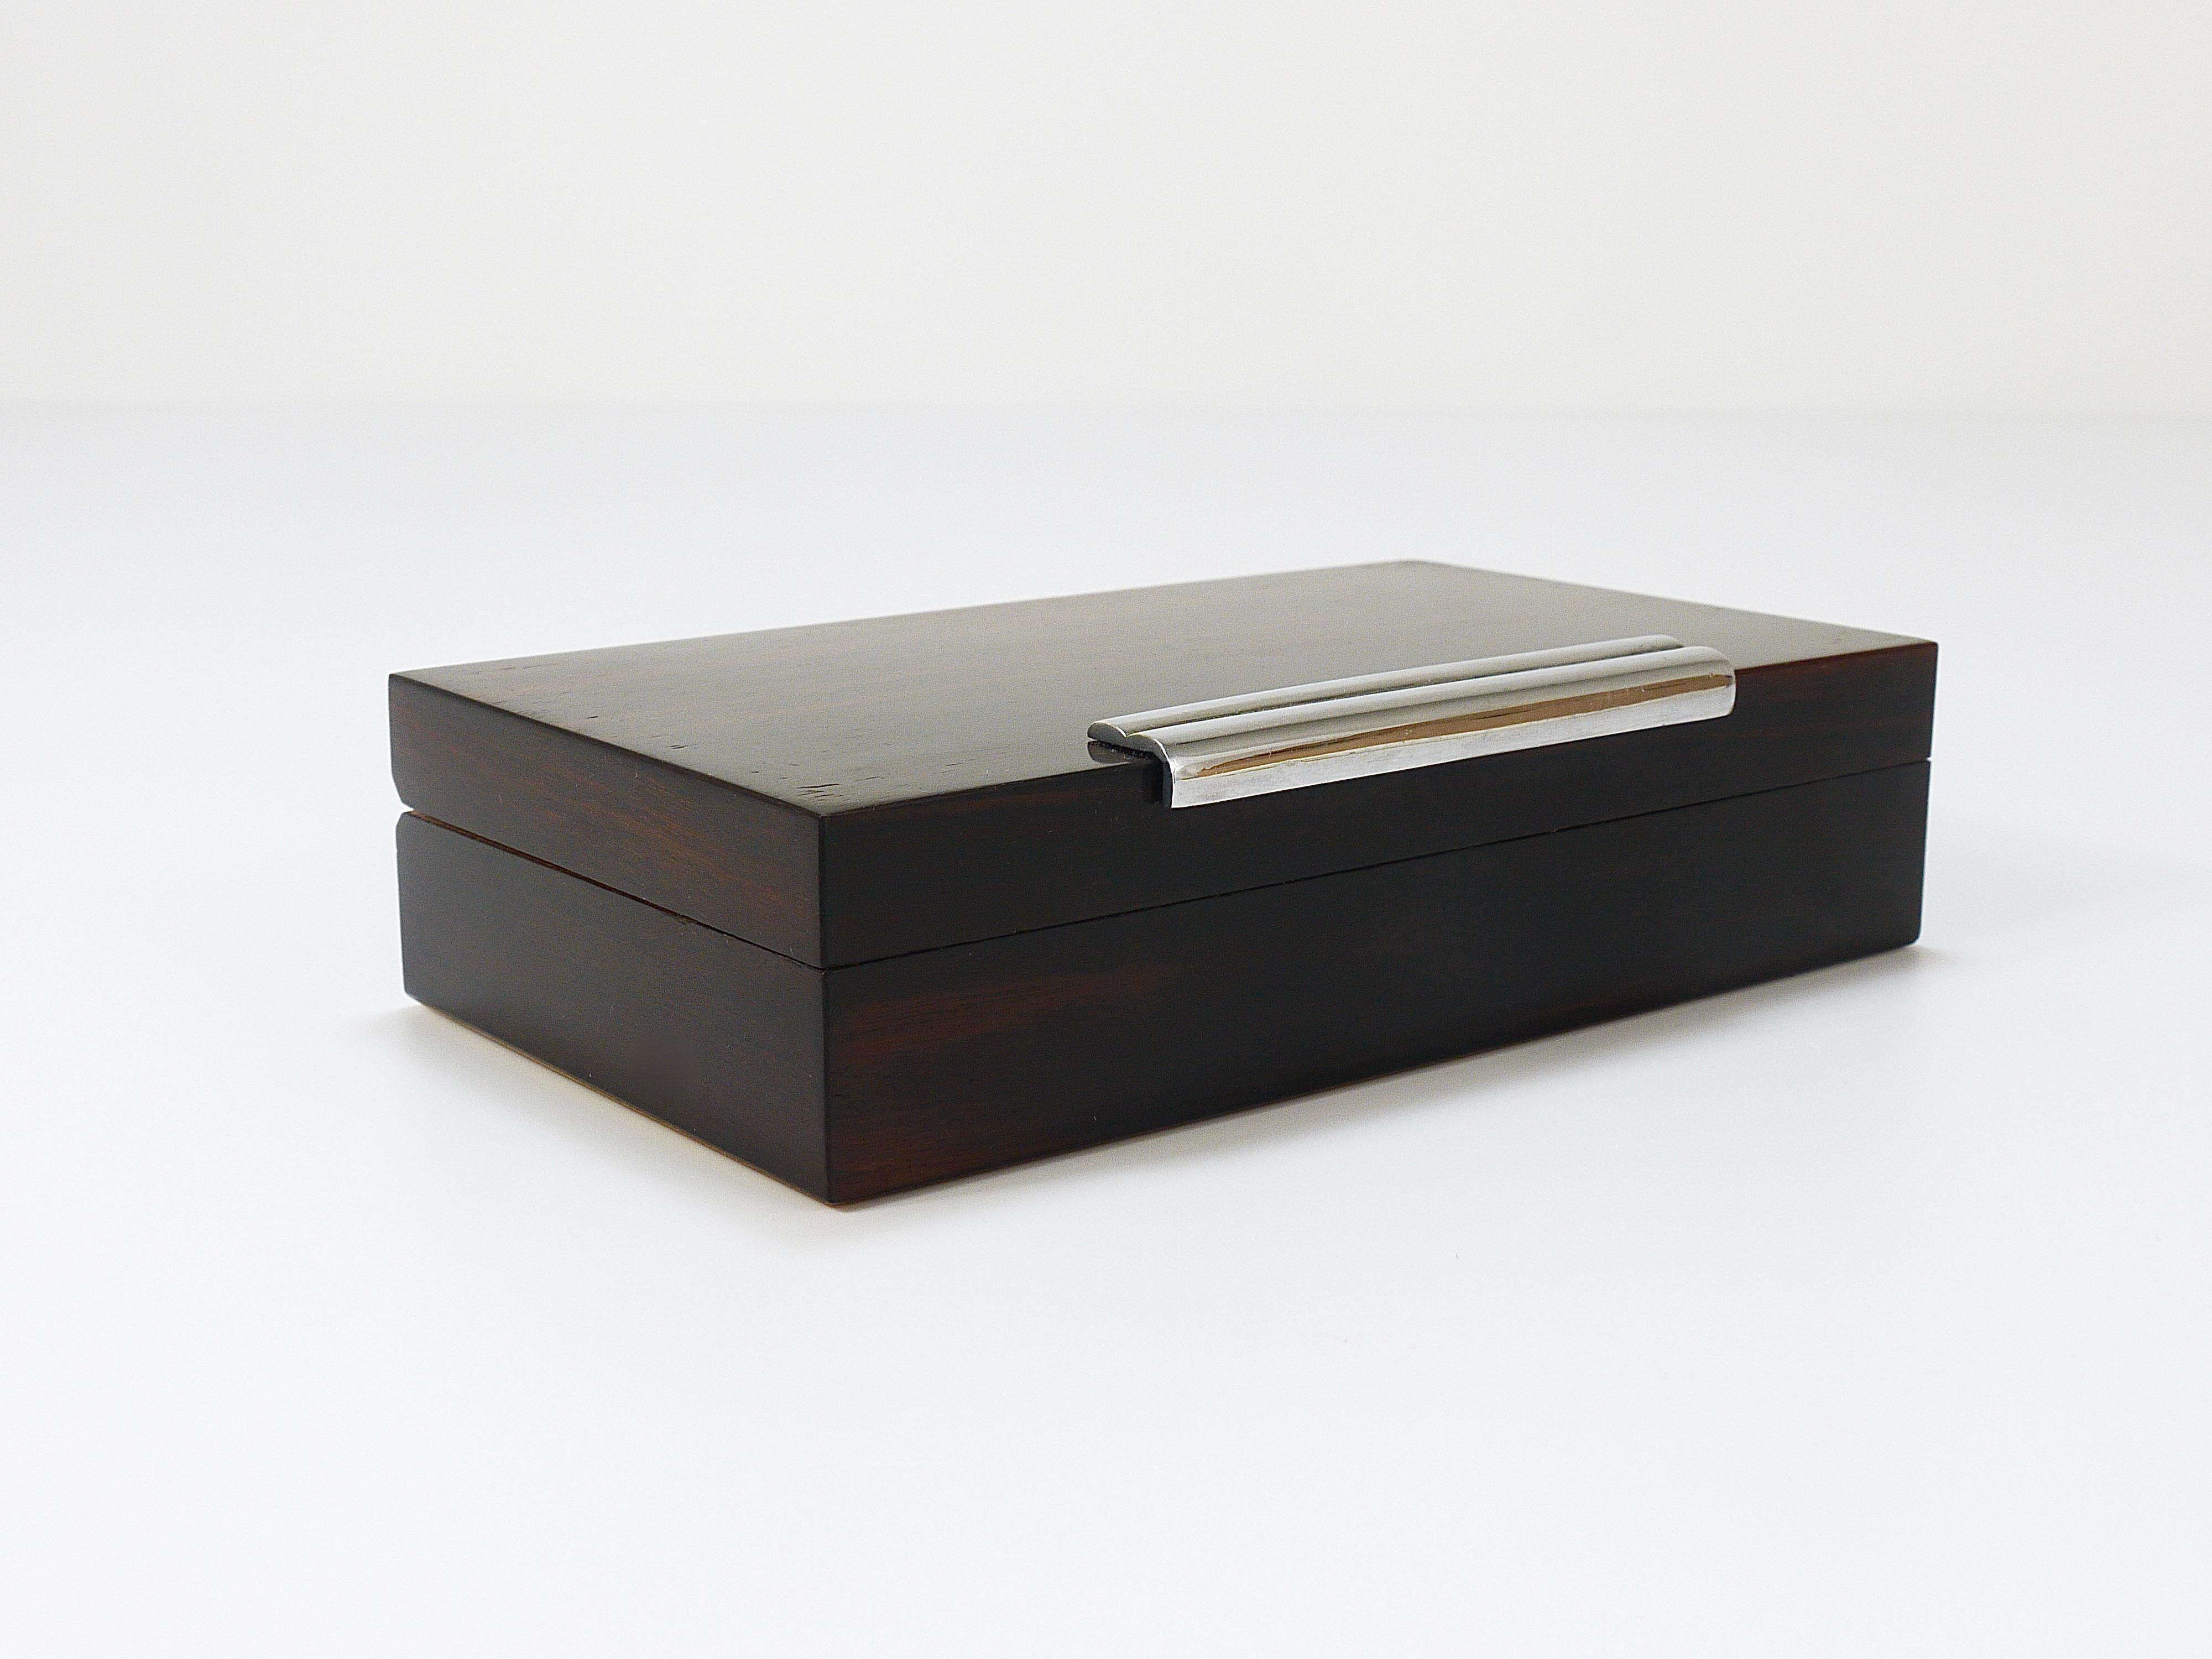 French Art Deco Rosewood & Nickel Storage Box, Maison Desny Style, France, 1930s In Good Condition For Sale In Vienna, AT